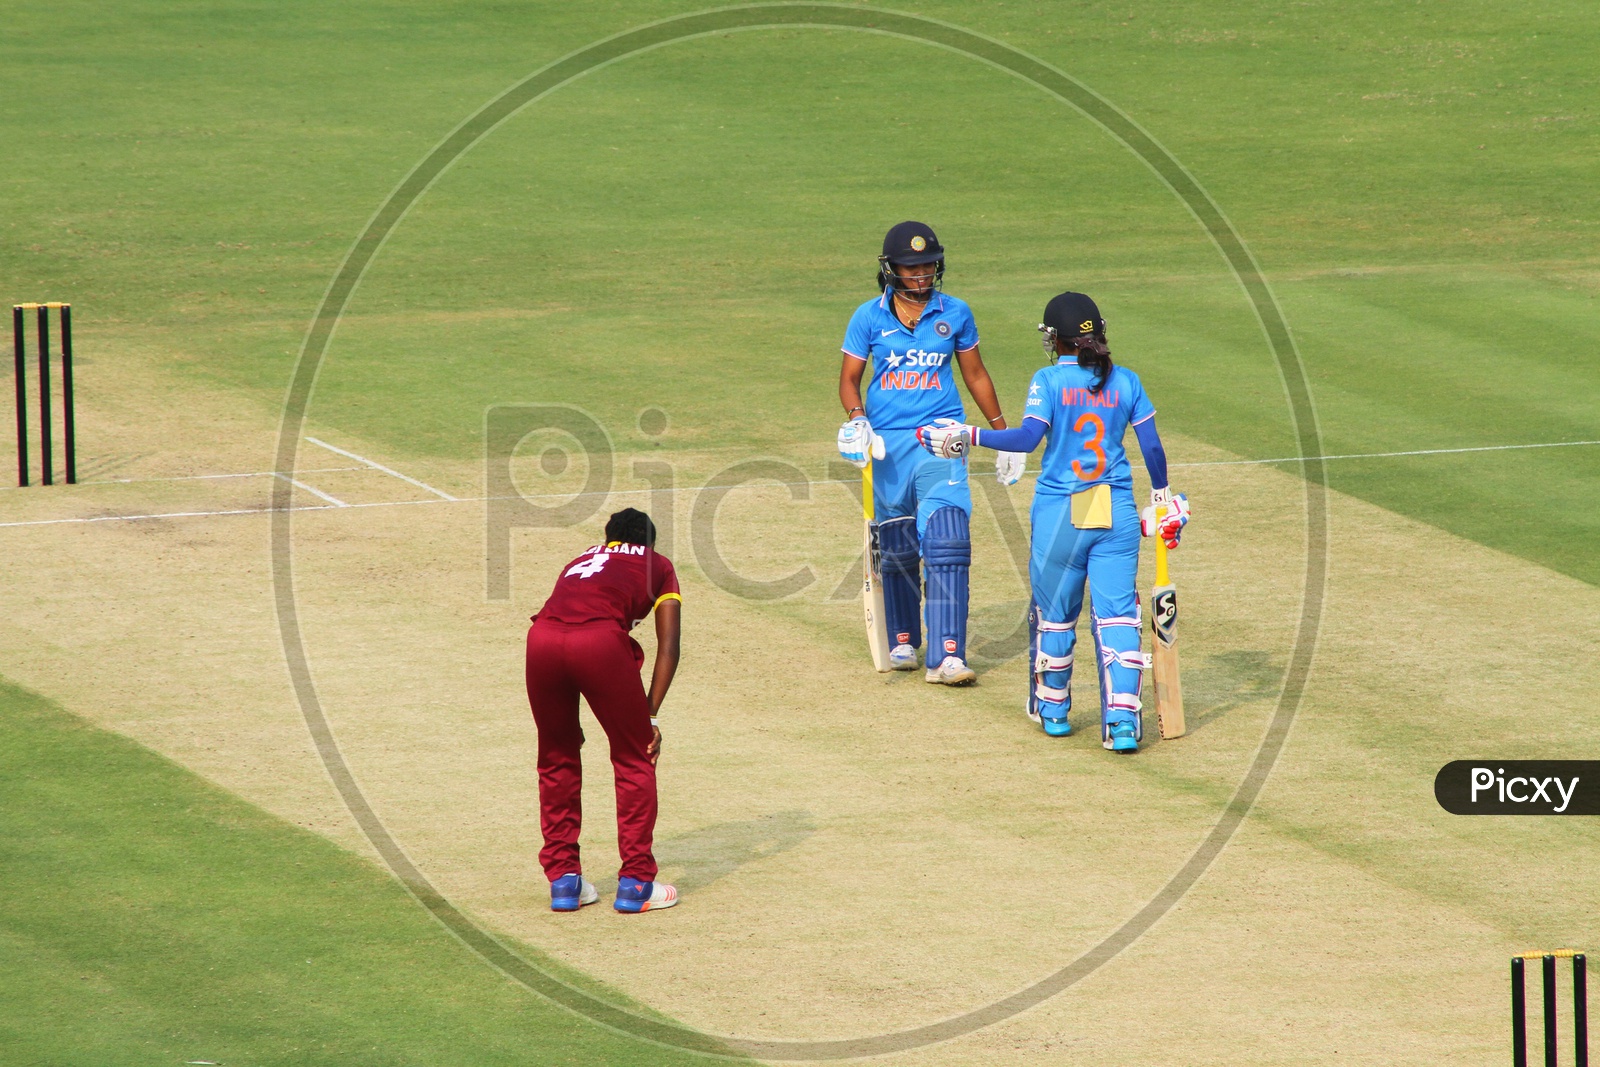 Indian Cricketer Mithali Raj in the middle of the  pitch